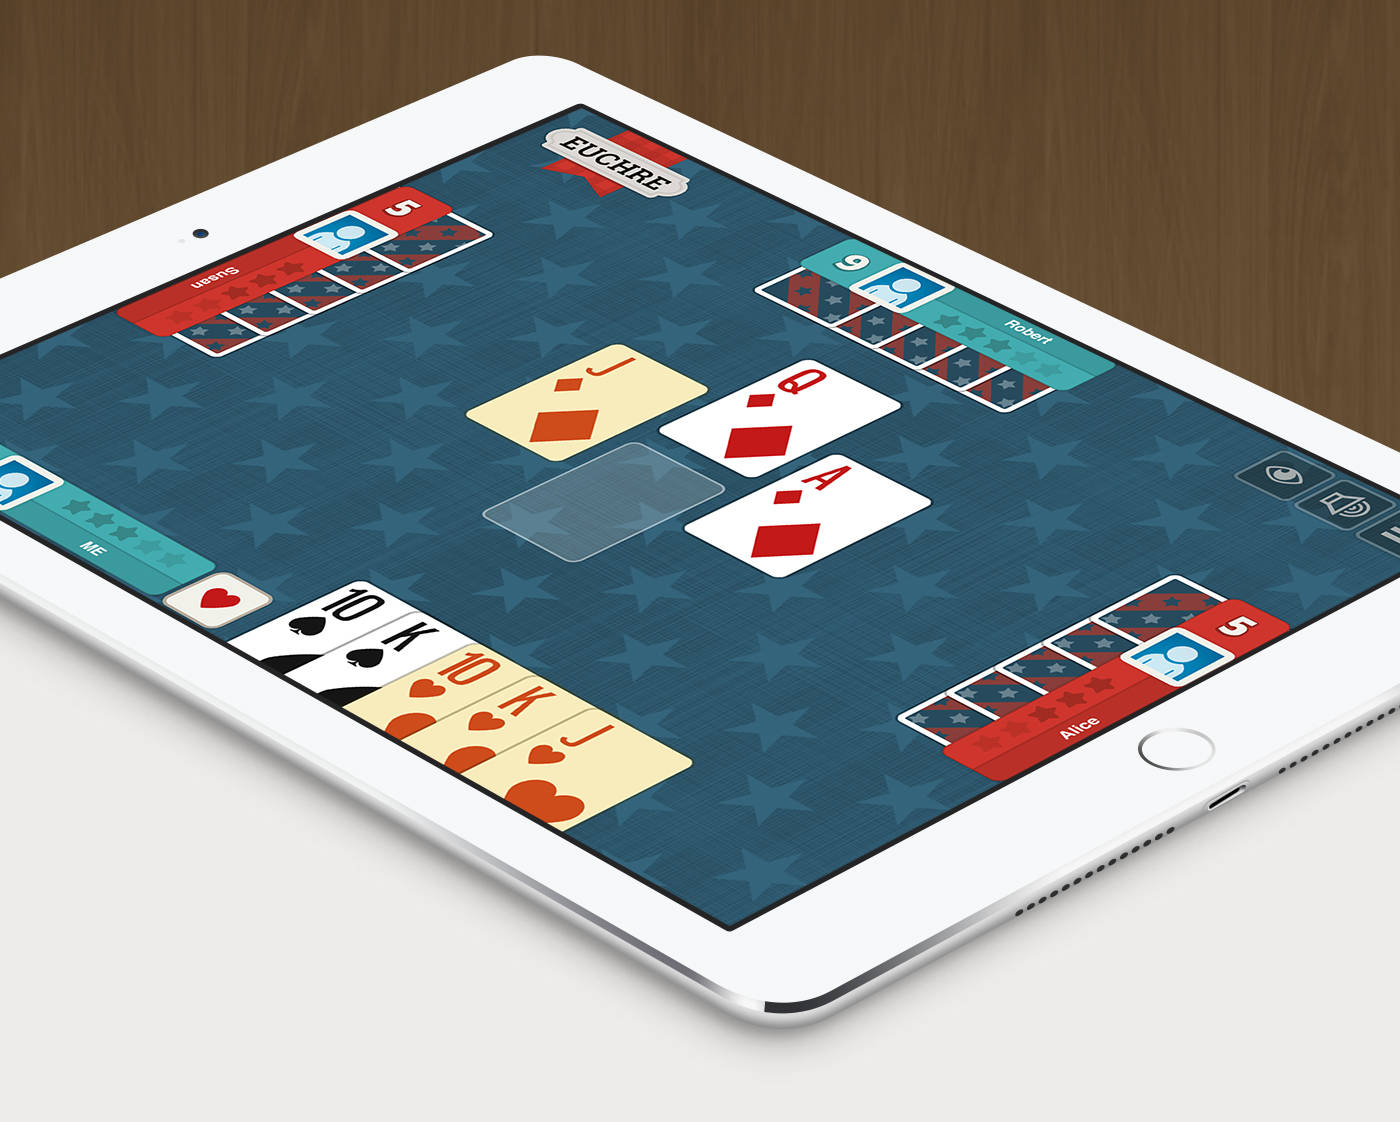 Euchre Playing Card Game On Ipad Picture